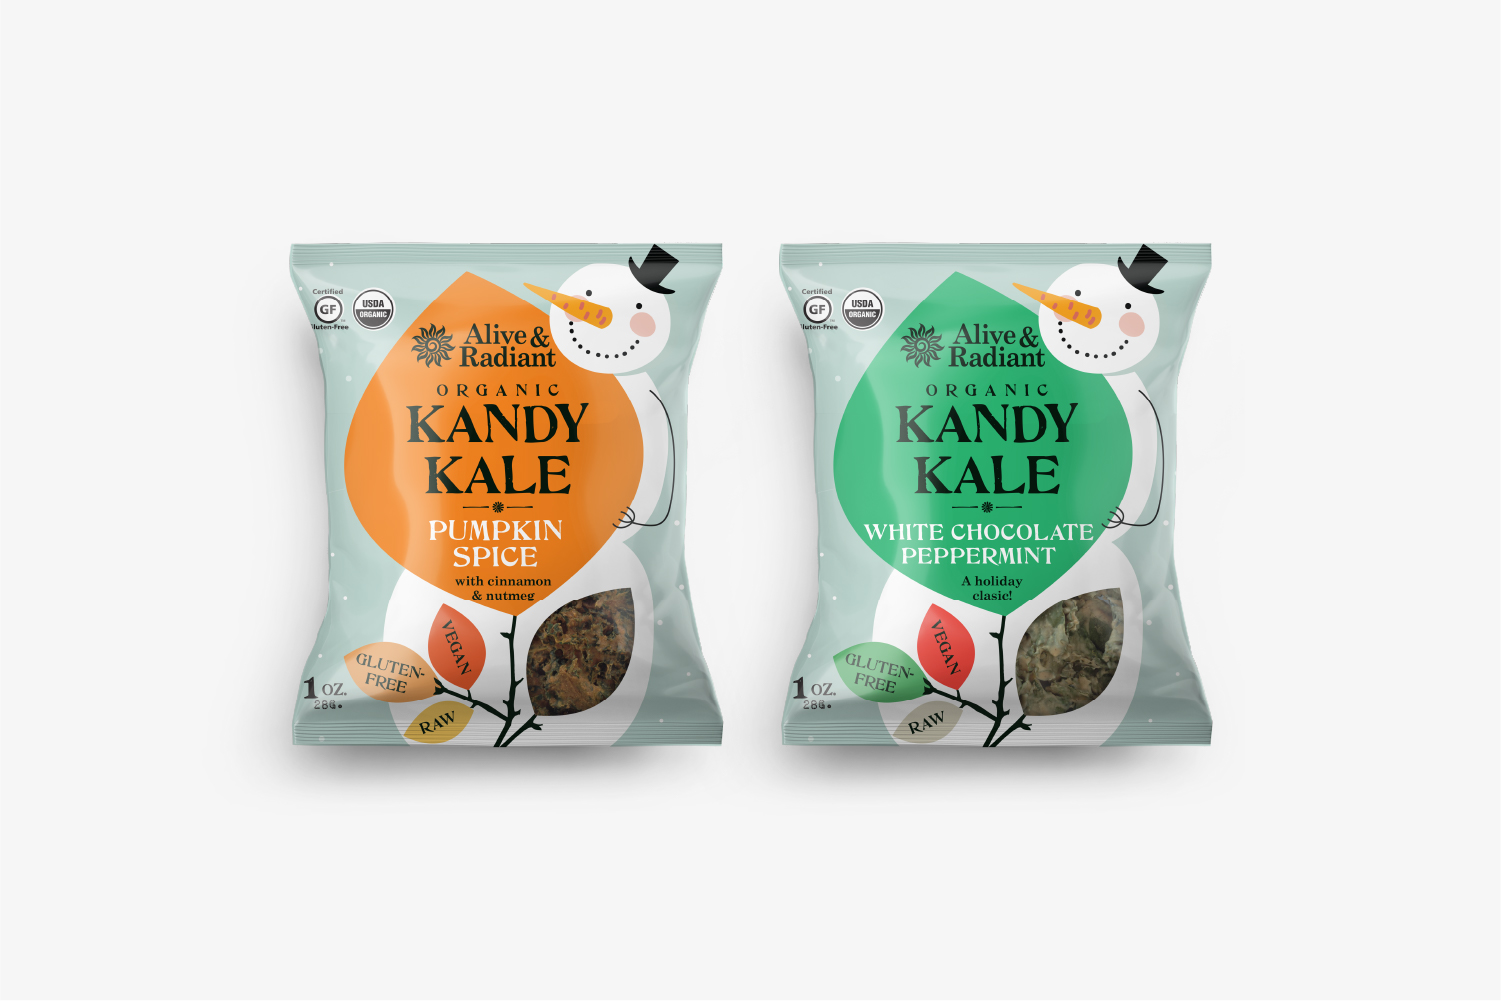 Alternate Kandy Kale concept for holiday—pumpkin spice and white chocolate peppermint